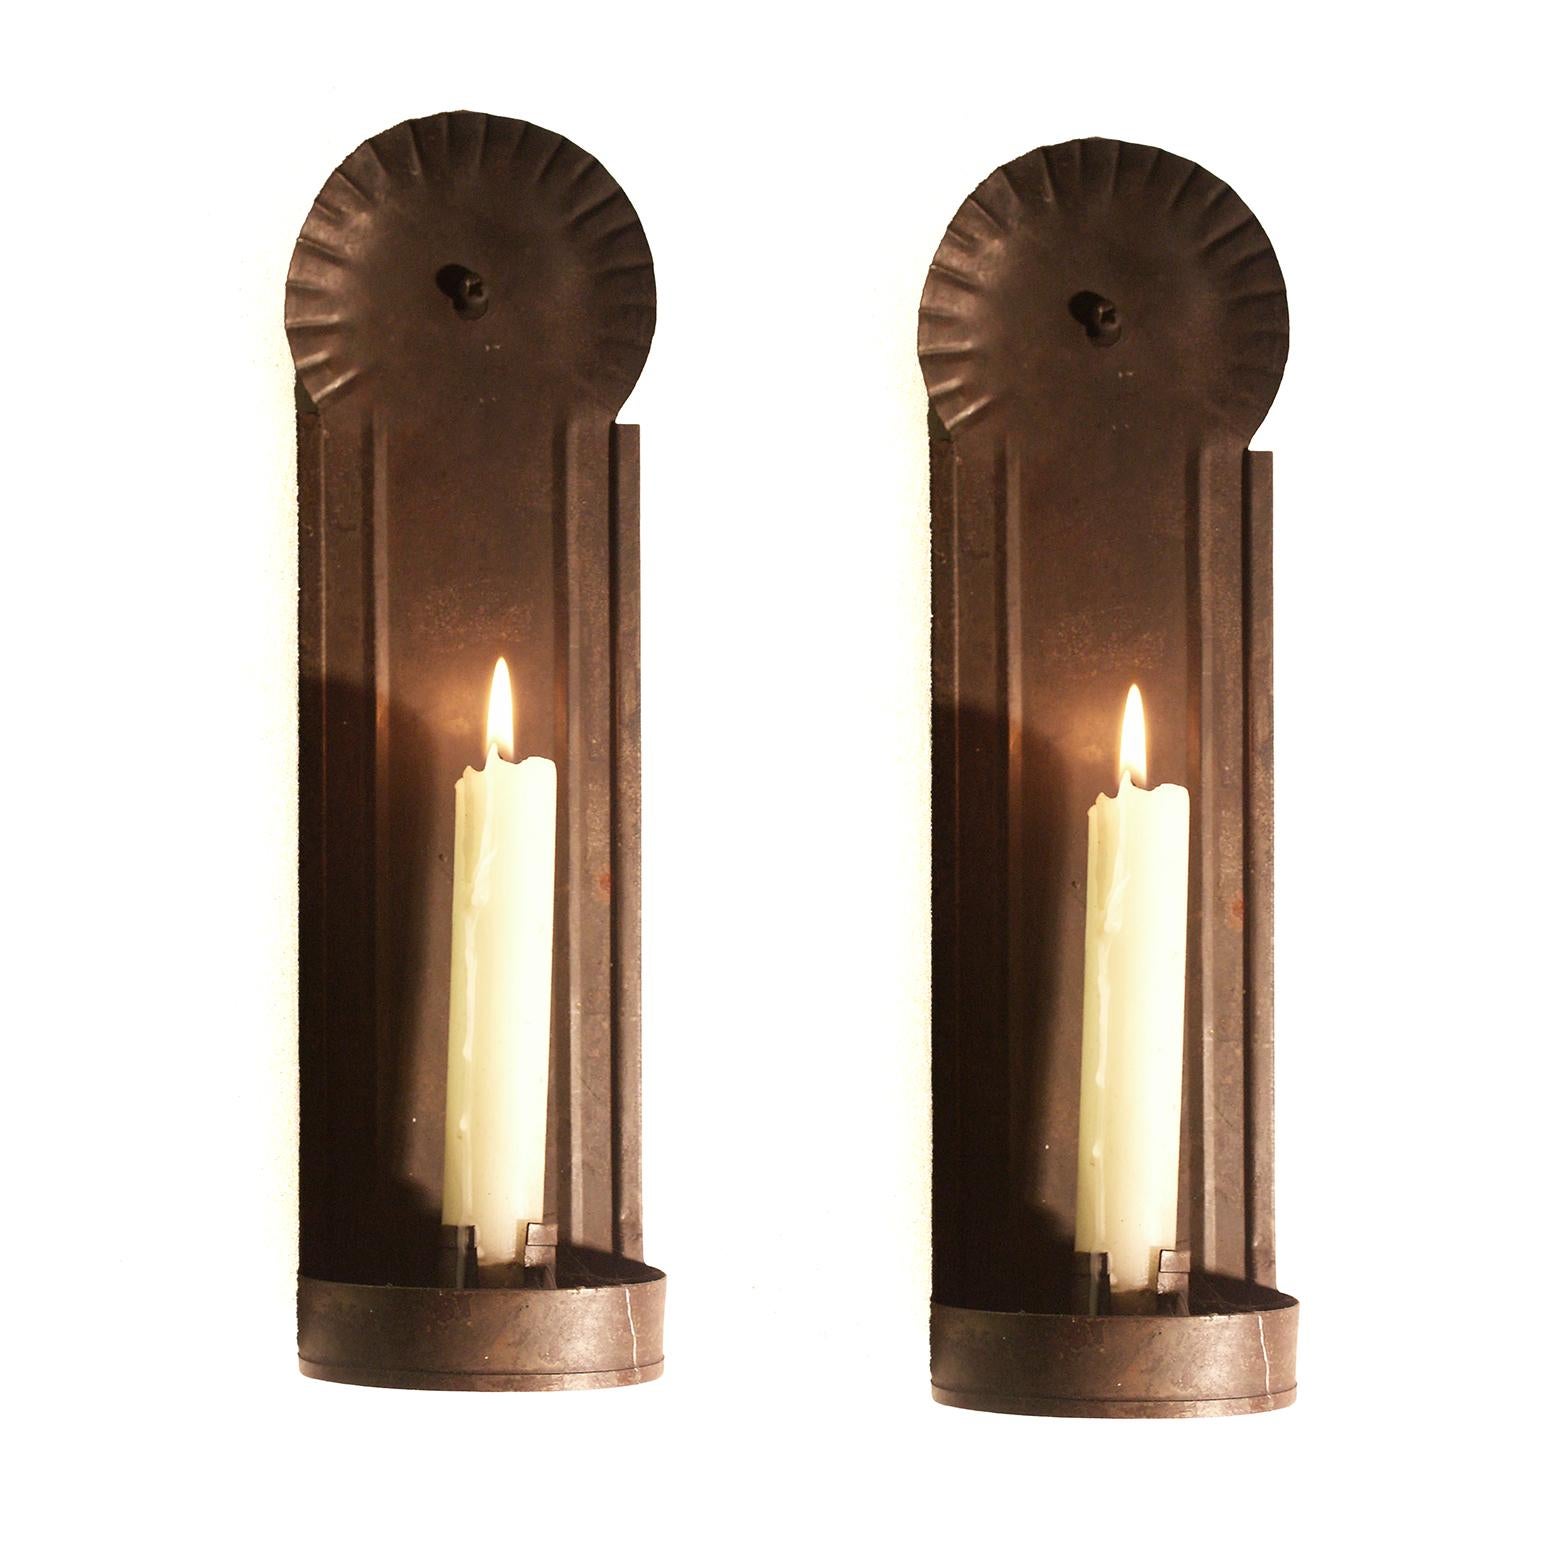 Surviving pieces of vernacular lighting are extremely rare and it is hard to source convincing re-creations. These are copies of a period sconce from Longfellows Wayside Inn S Sudbury MA and have a plausible antiqued patina.

SIngle candle tin